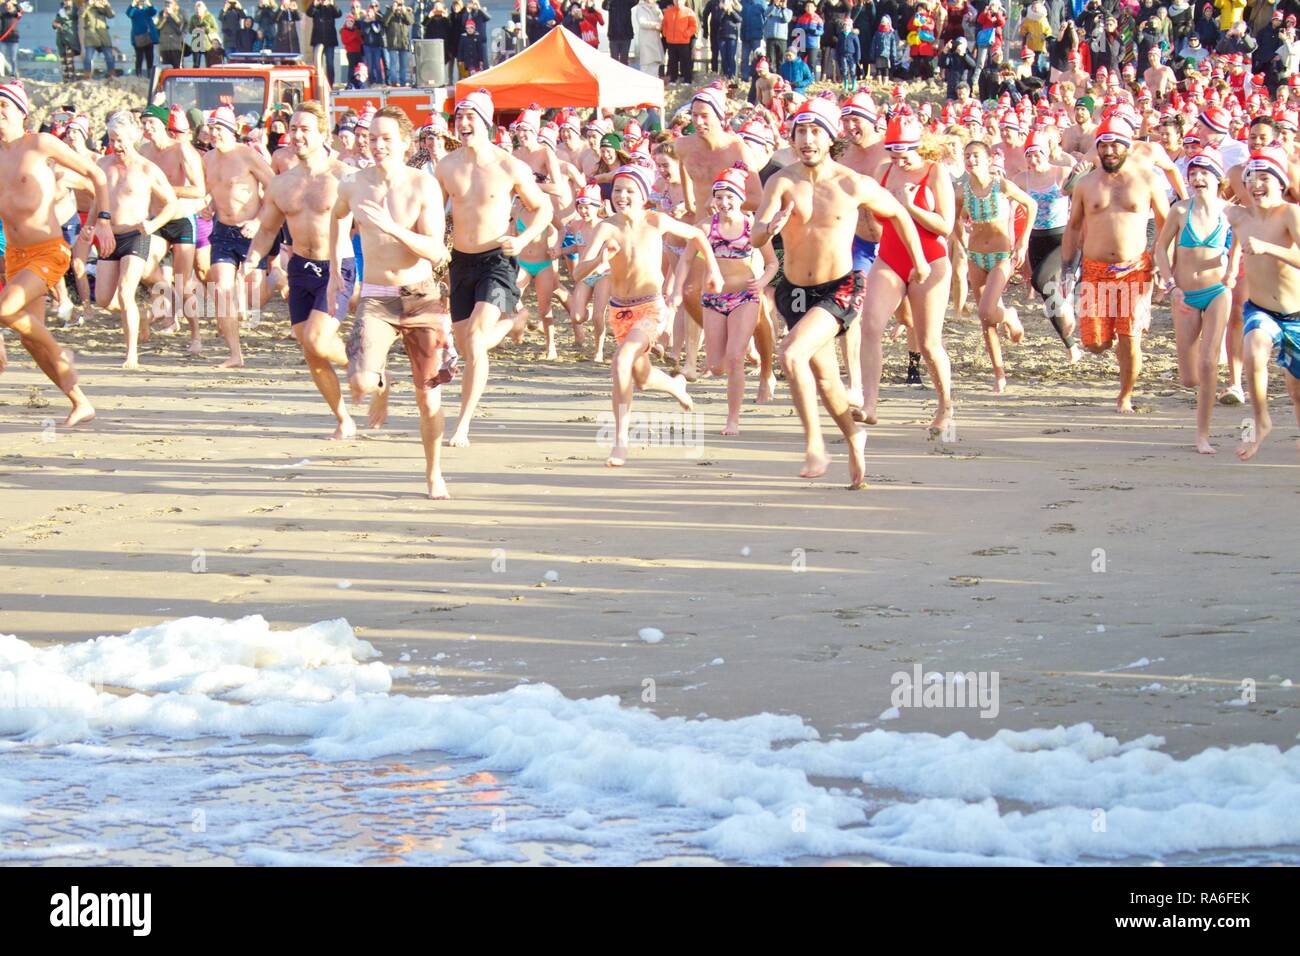 Beijing, Netherlands. 1st Jan, 2019. People swarm into the sea during a traditional New Year's Dip event to celebrate the beginning of the New Year in Bloemendaal aan Zee, the Netherlands, on Jan. 1, 2019. Credit: Sylvia Lederer/Xinhua/Alamy Live News Stock Photo